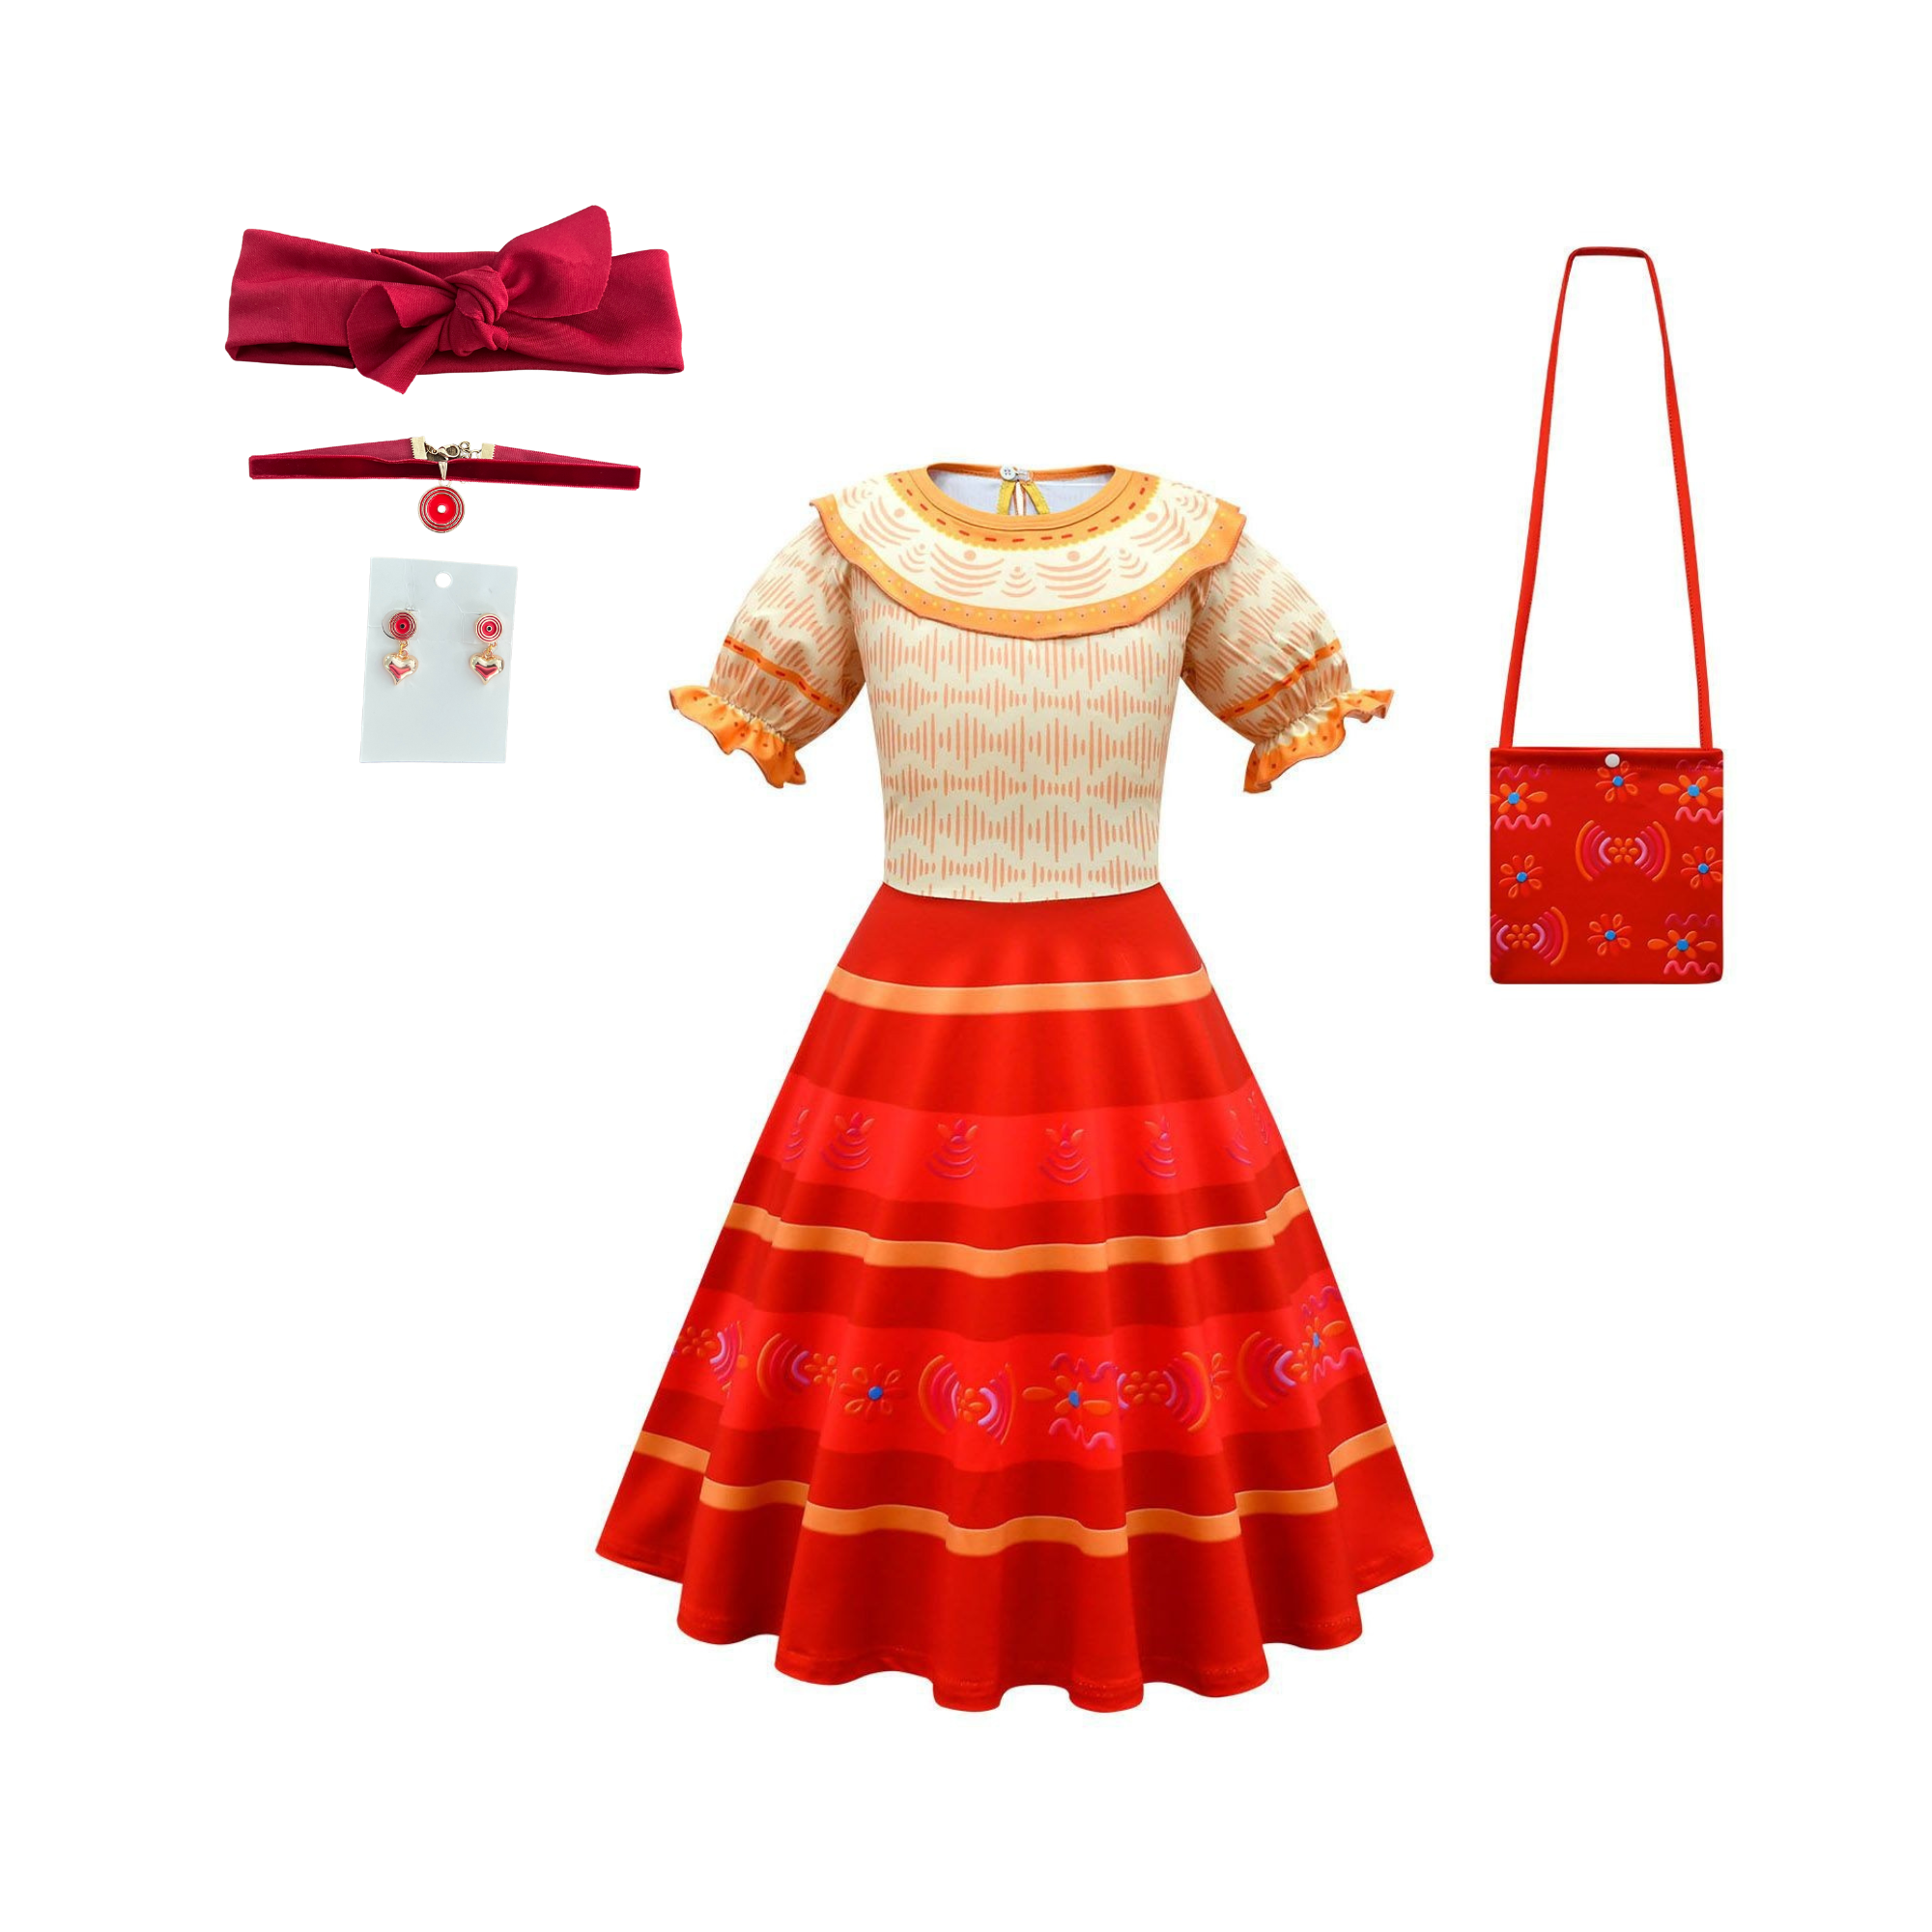 Encanto Dolores Dress and Bag with Inspired Costume Dress-up Set, Headpiece, Earrings, and Necklace